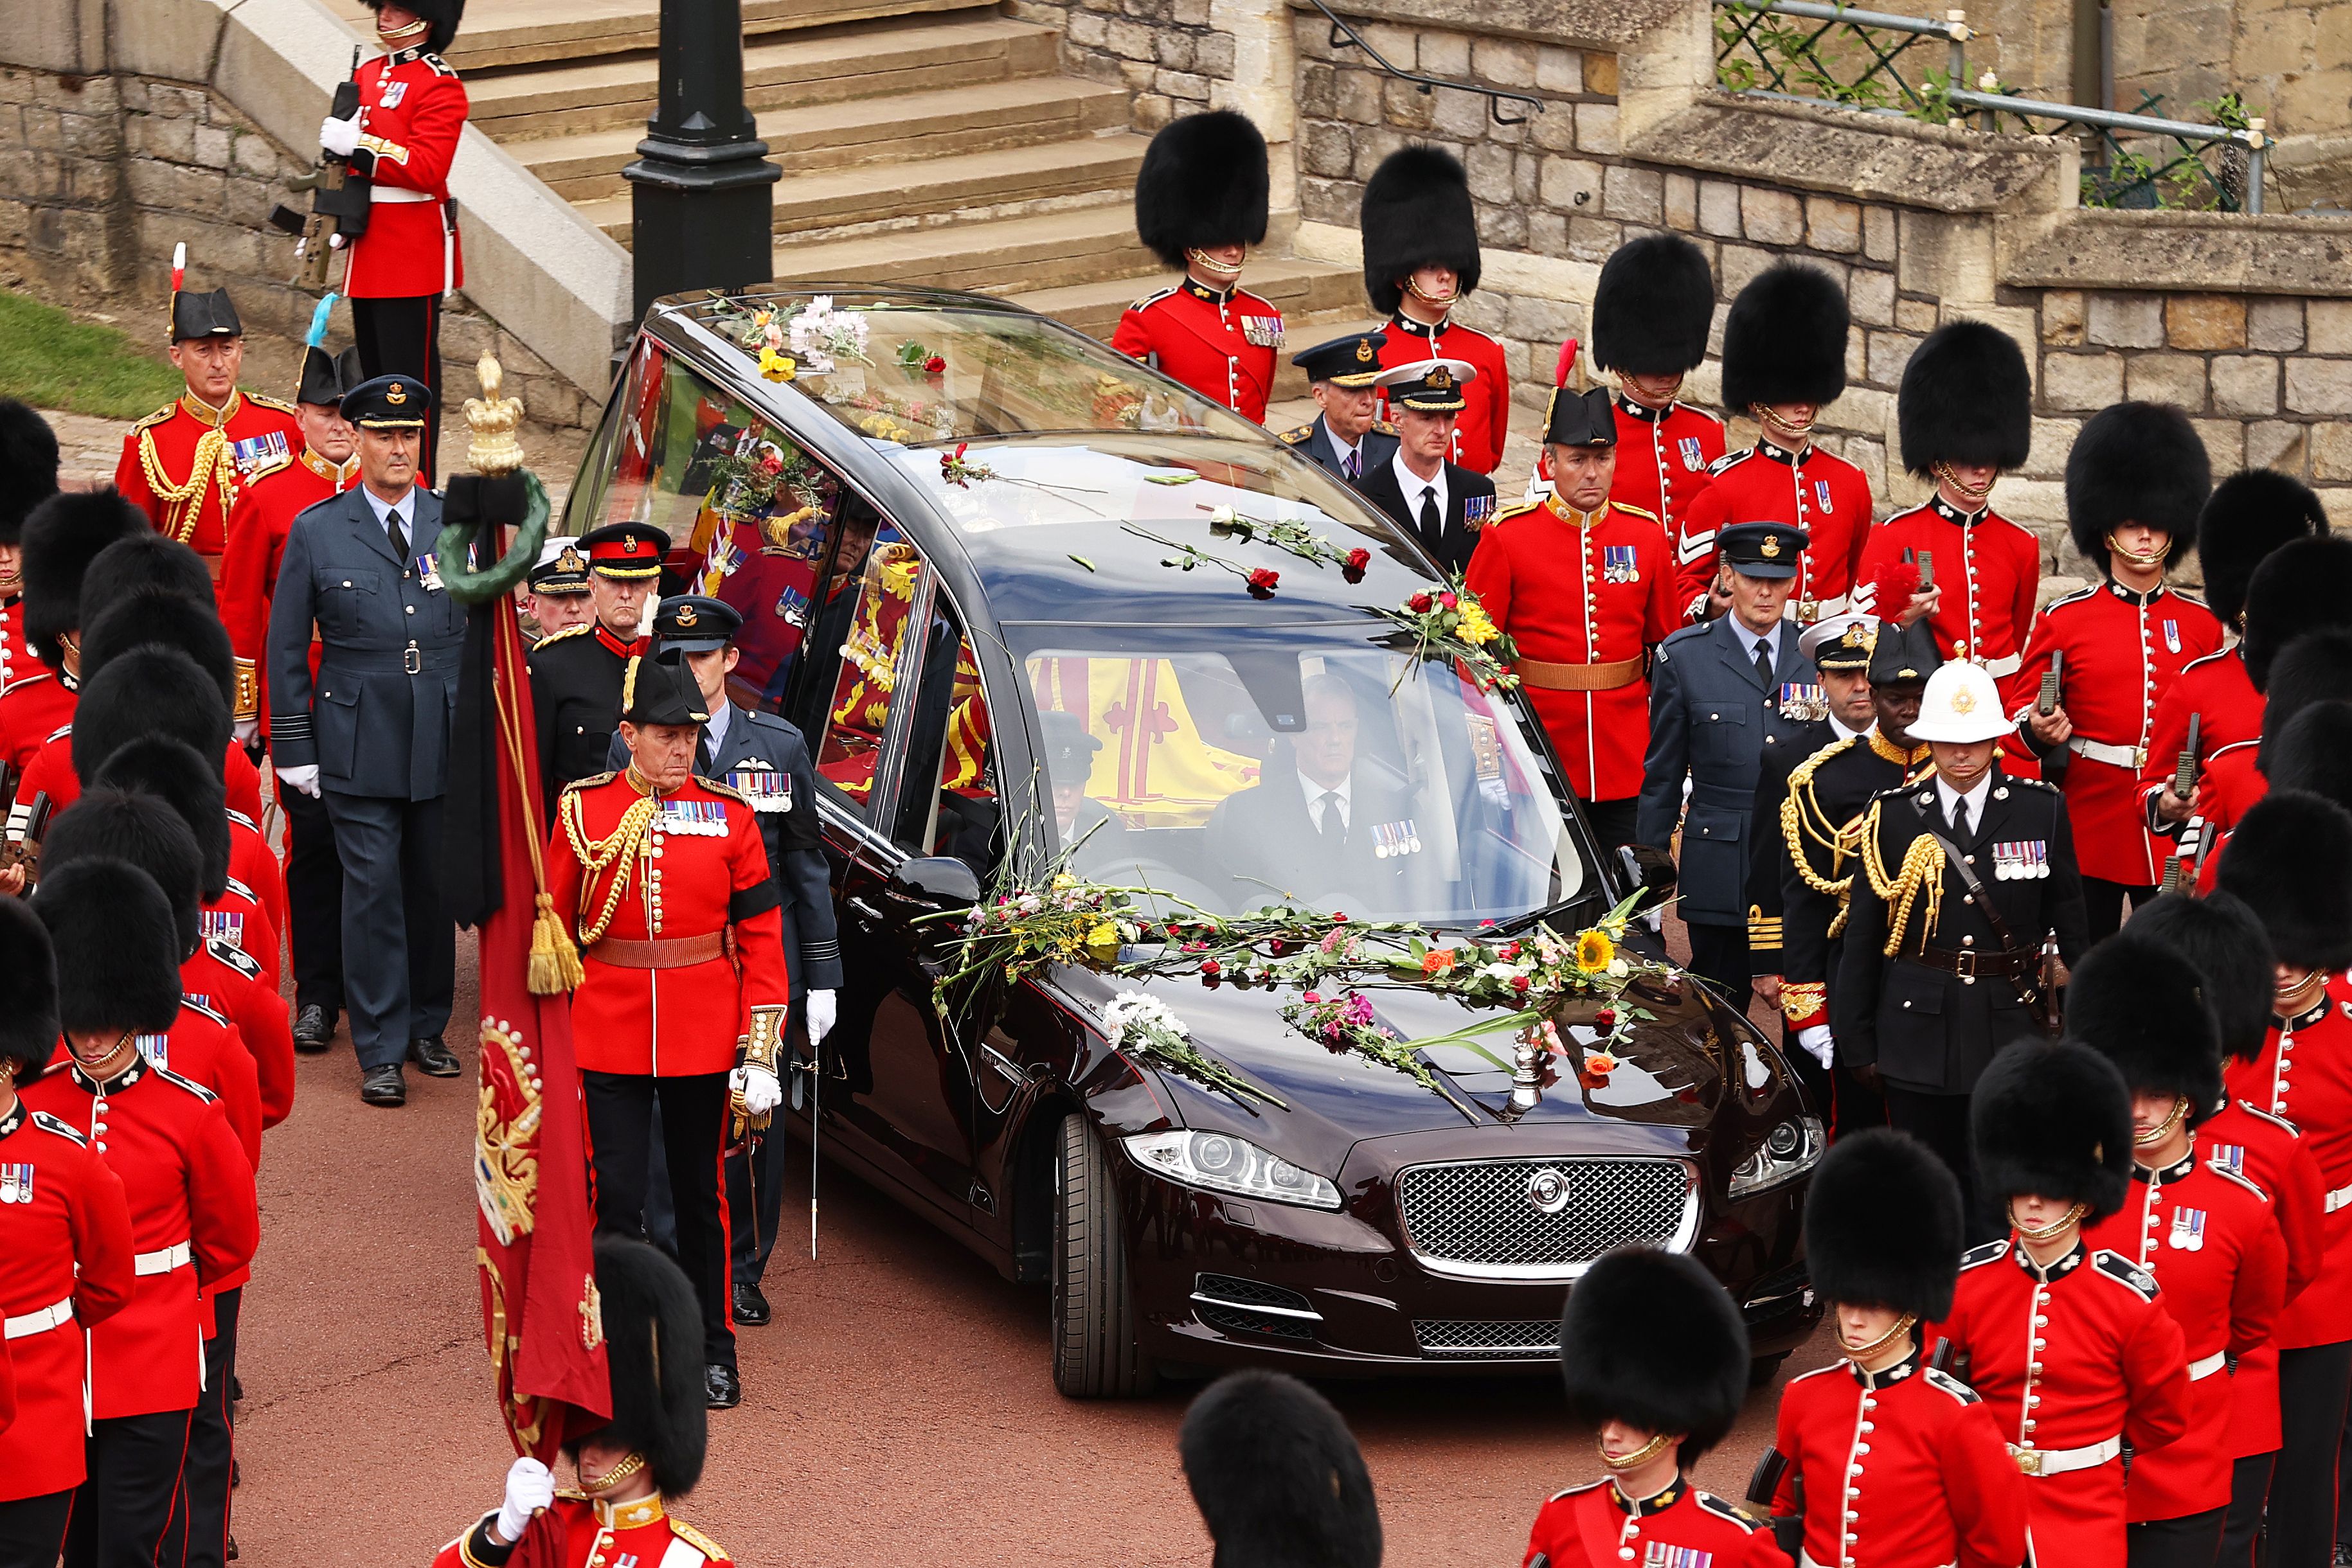 The coffin of Queen Elizabeth II is carried in The state hearse as it proceeds towards St. George's Chapel on September 19, 2022